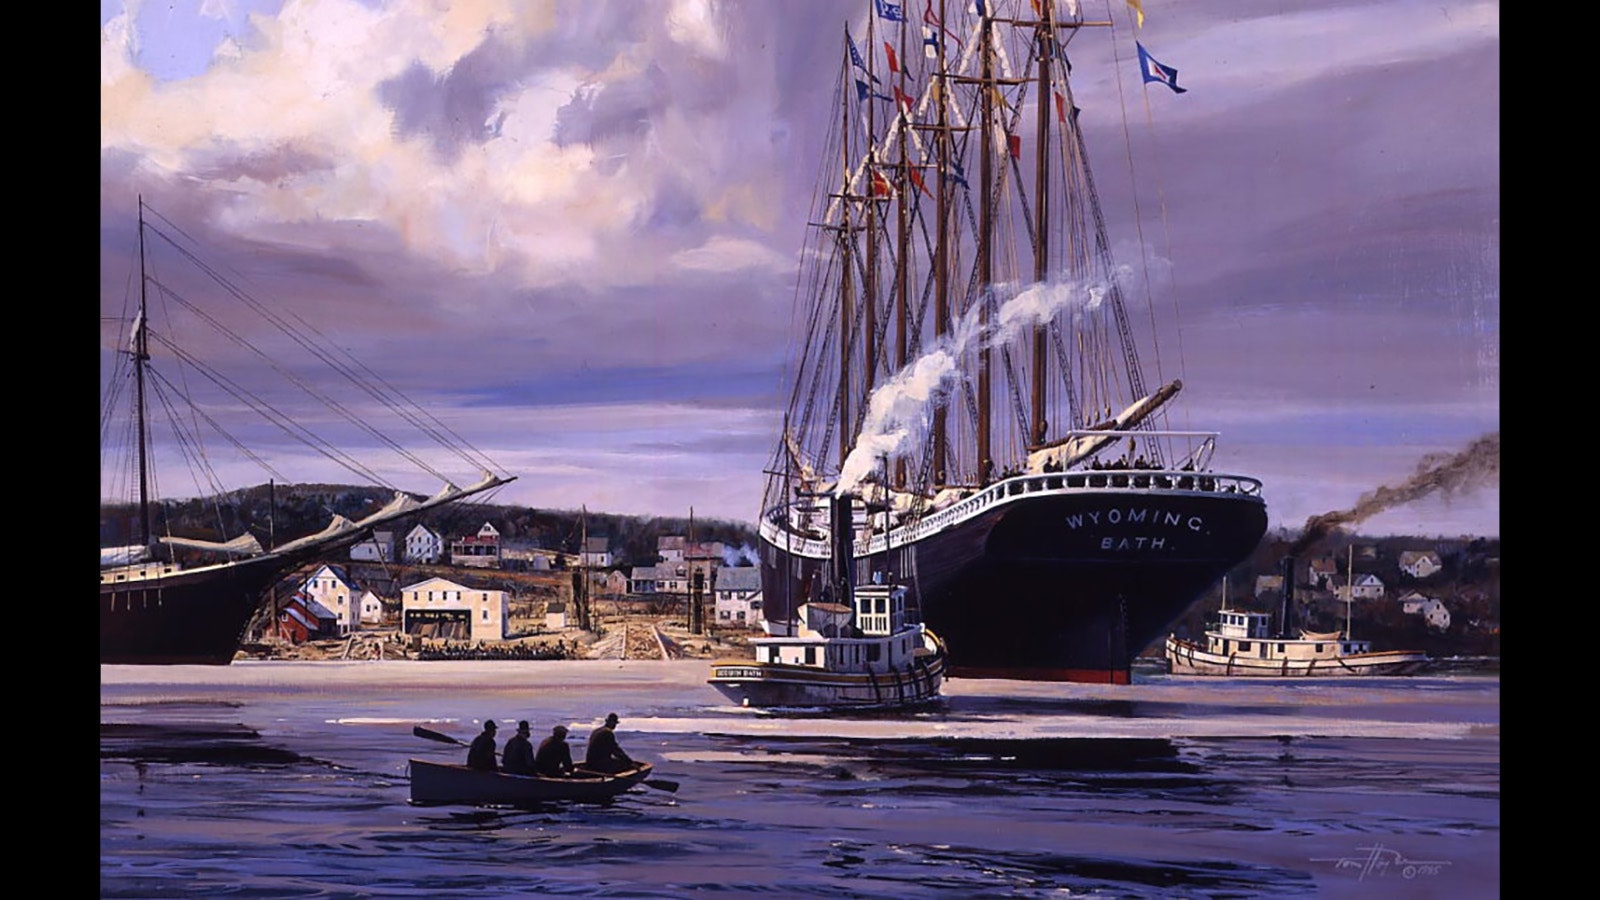 This painting by Thomas M. Hoyne III is titled "Pride of the Yard," and it memorializes the Wyoming's launch from the Percy and Small Shipyard in Bath, Maine, on Dec. 15, 1909.